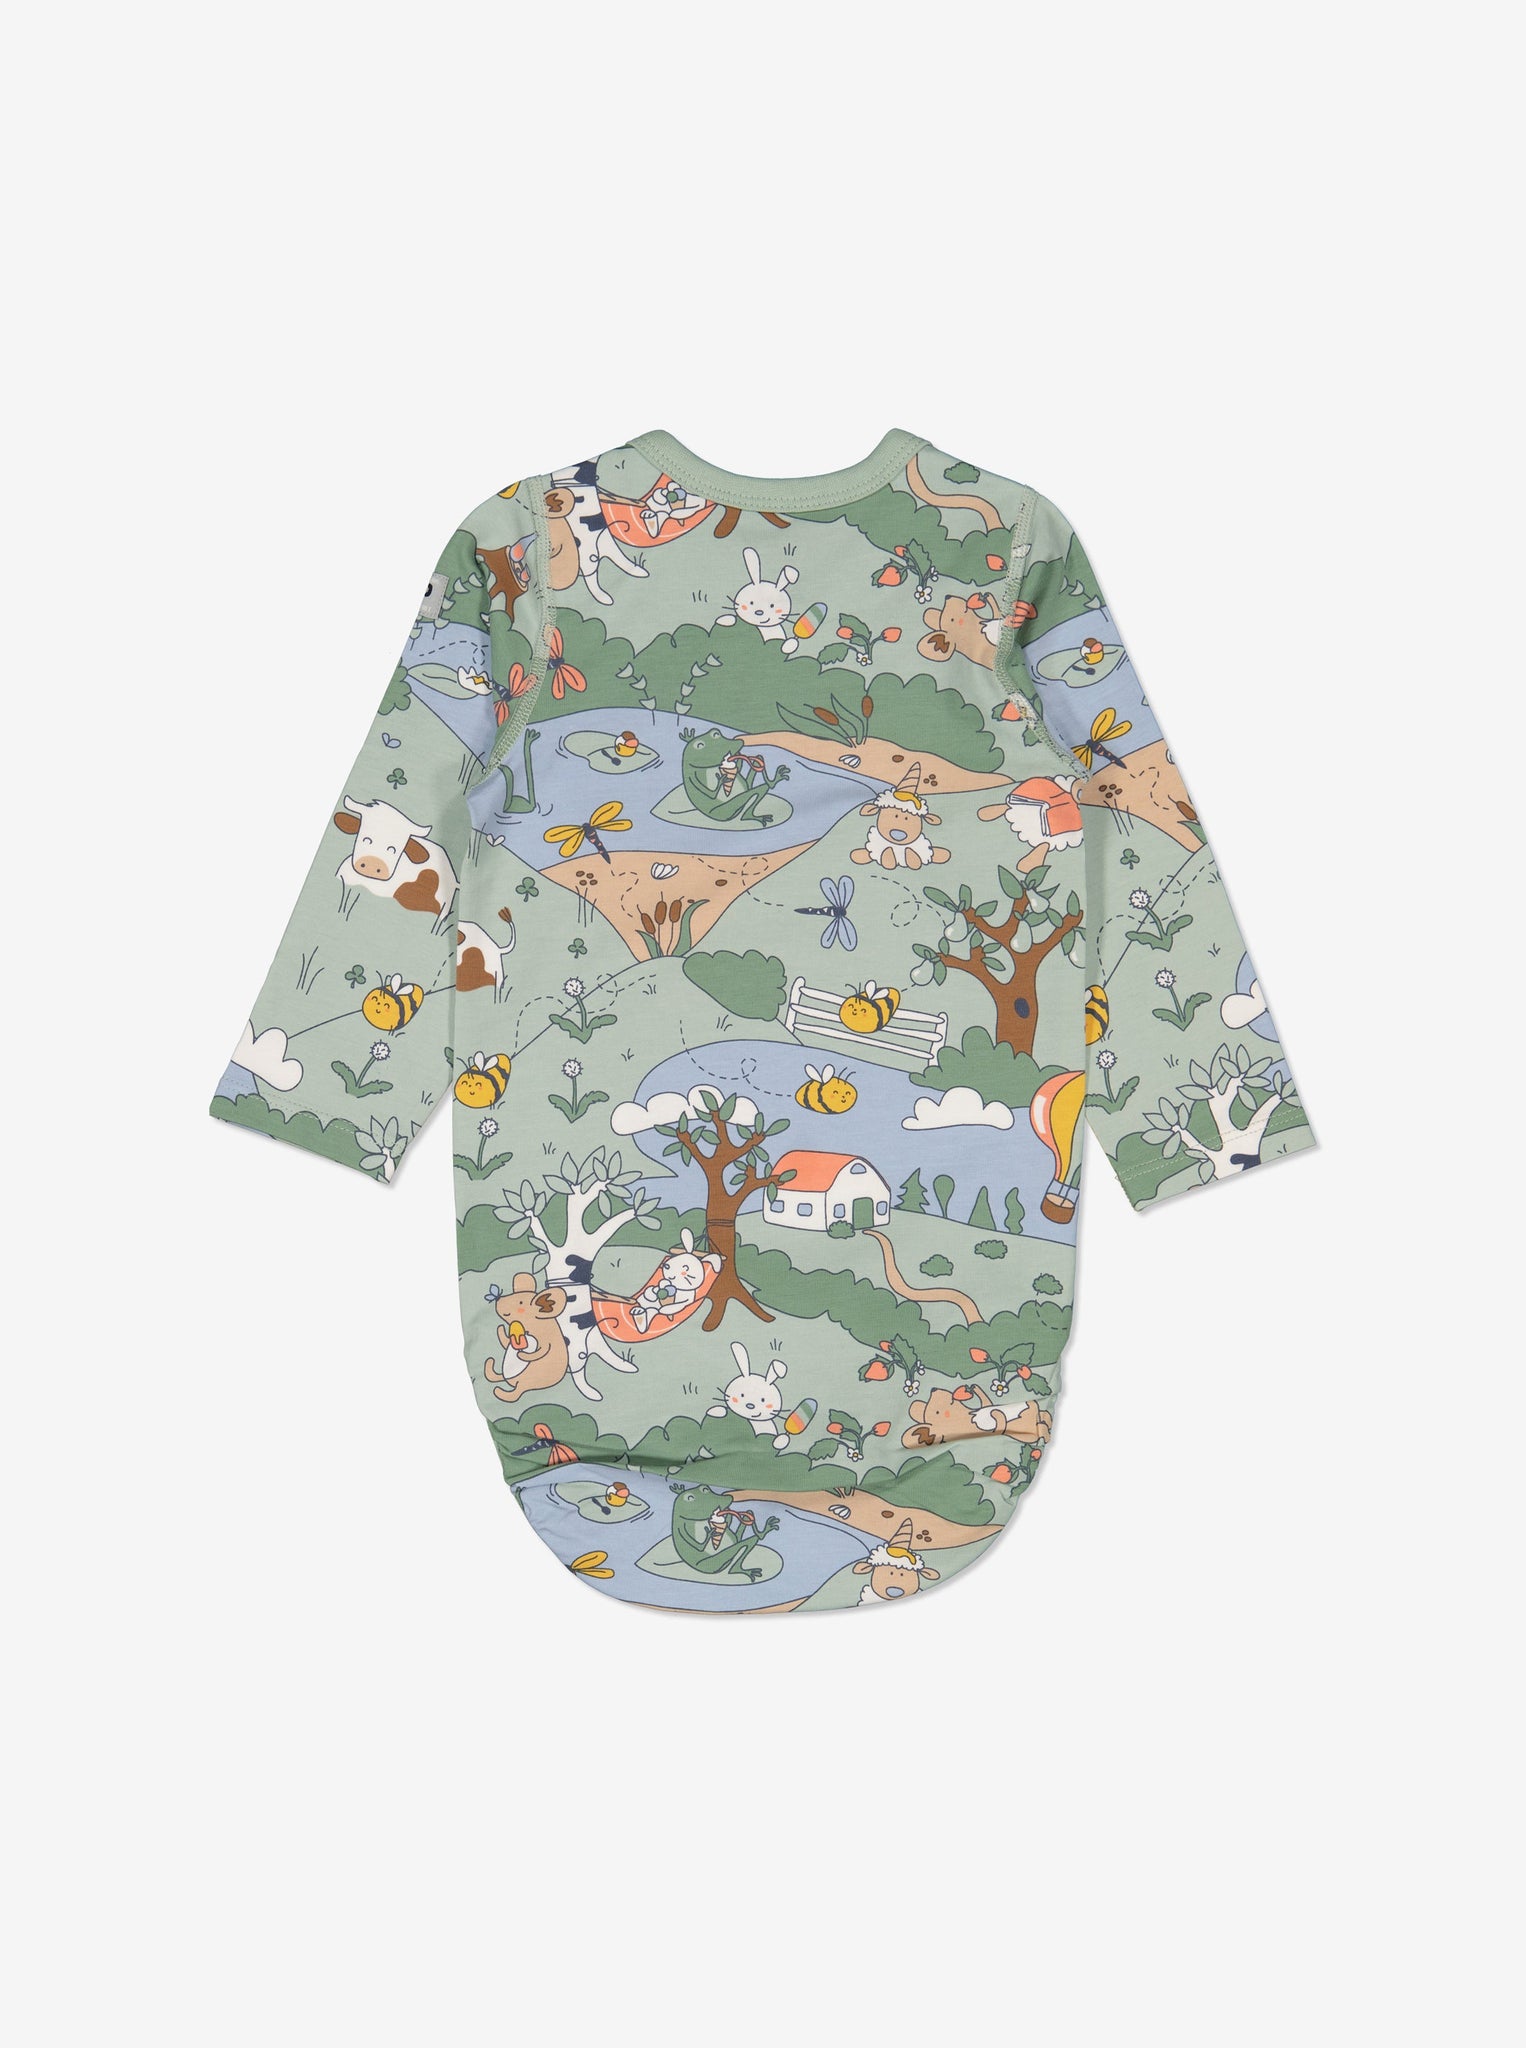 Wildlife Green Newborn Babygrow from Polarn O. Pyret Kidswear. Made using sustainable sourced materials.